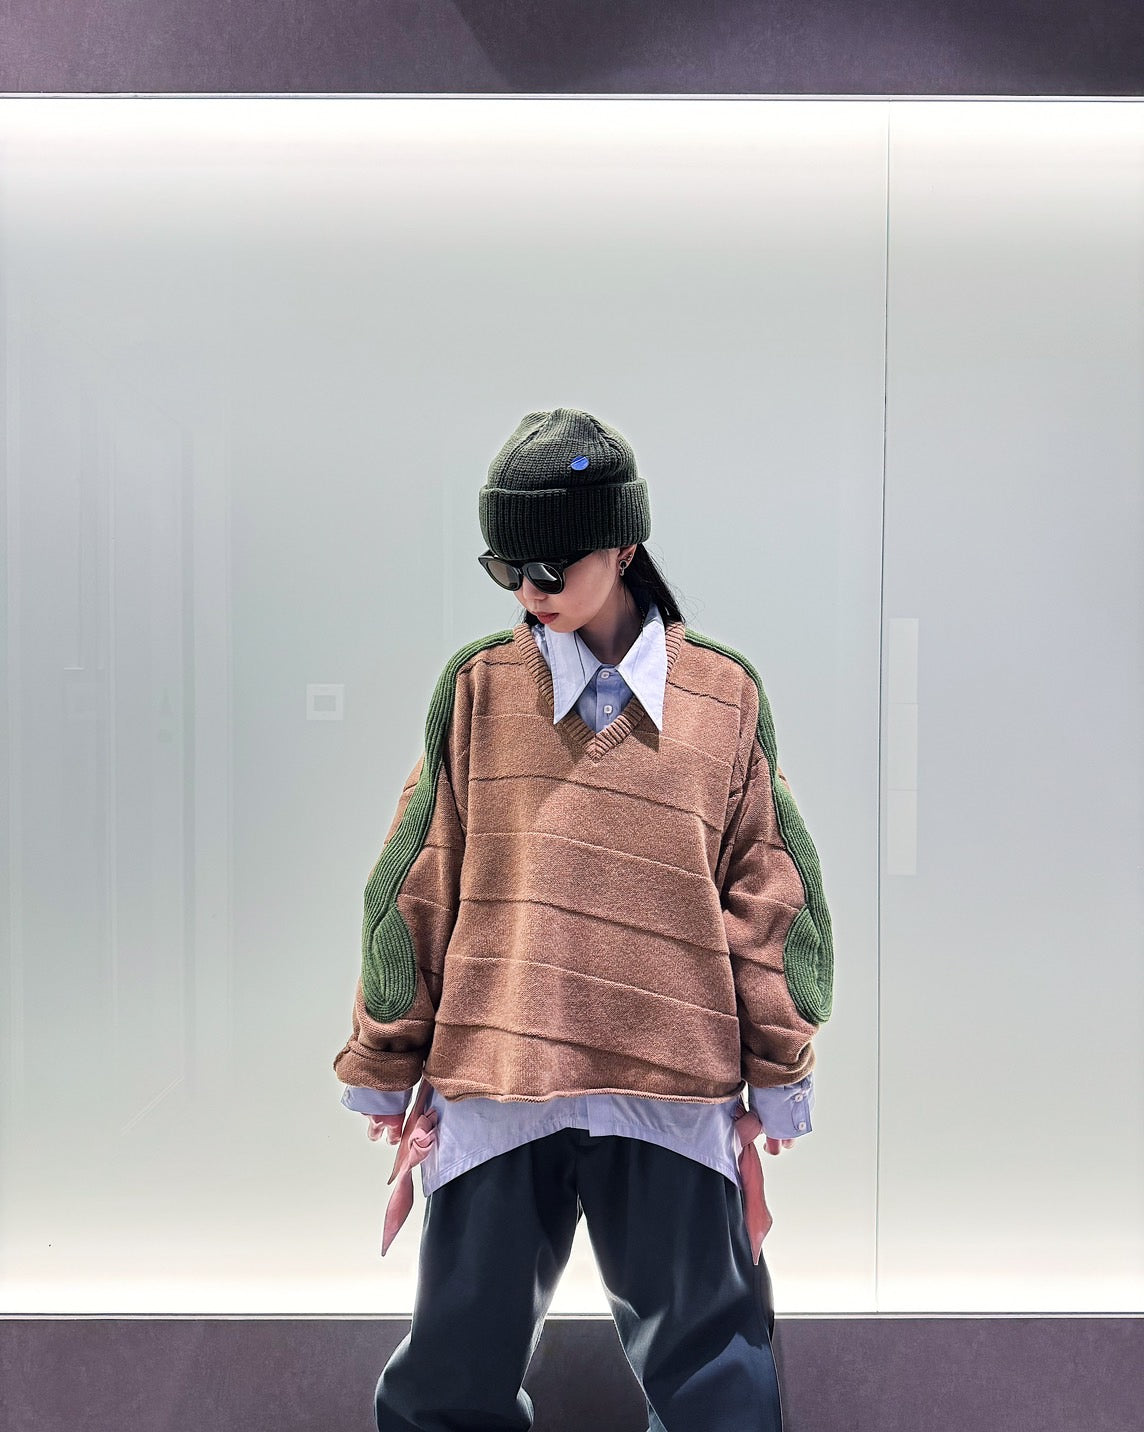 【KIKO KOSTADINOV】<br> New items from the 24SS collection are available!